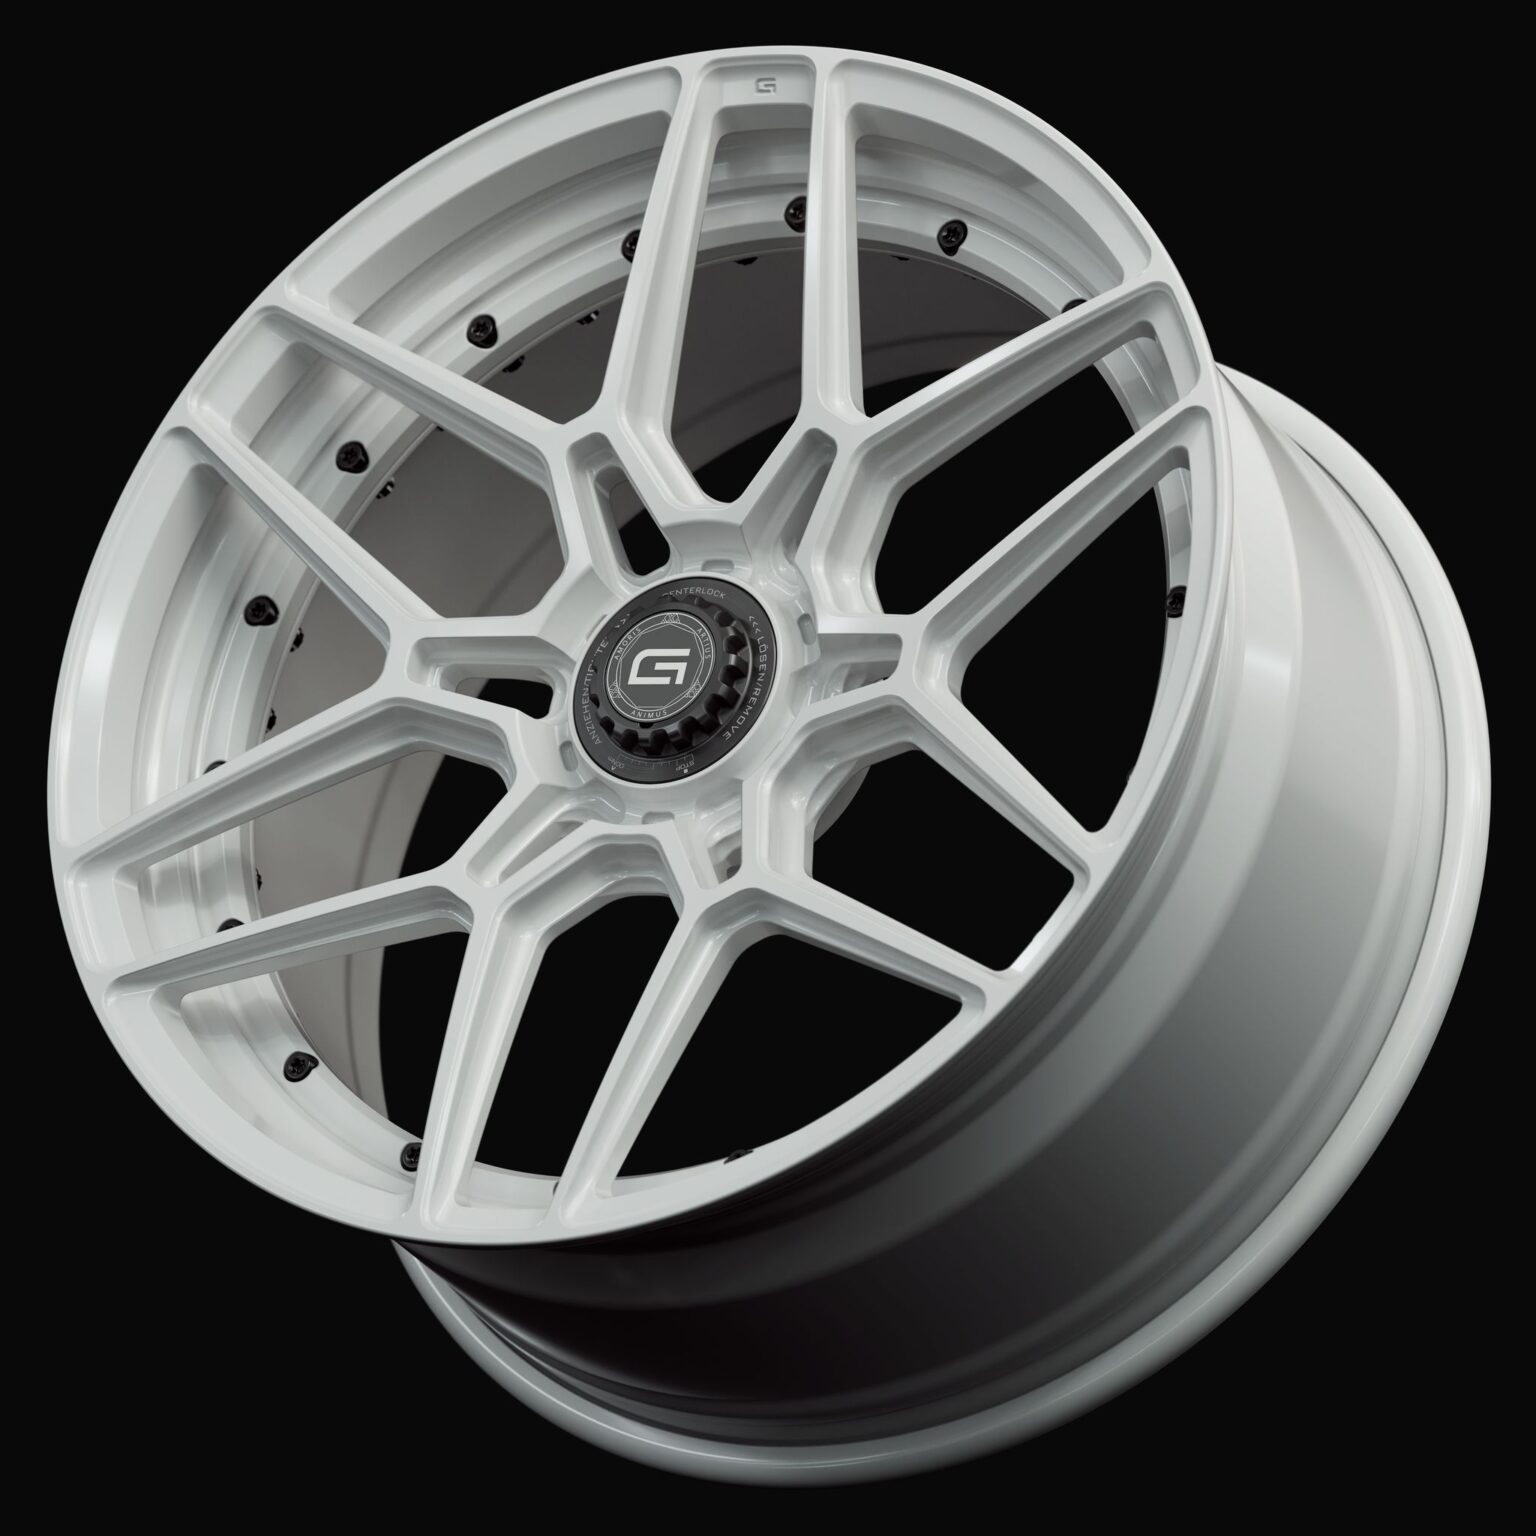 Three-quarter view of a white G46 duoblock centerlock wheel from Govad Forged Track series